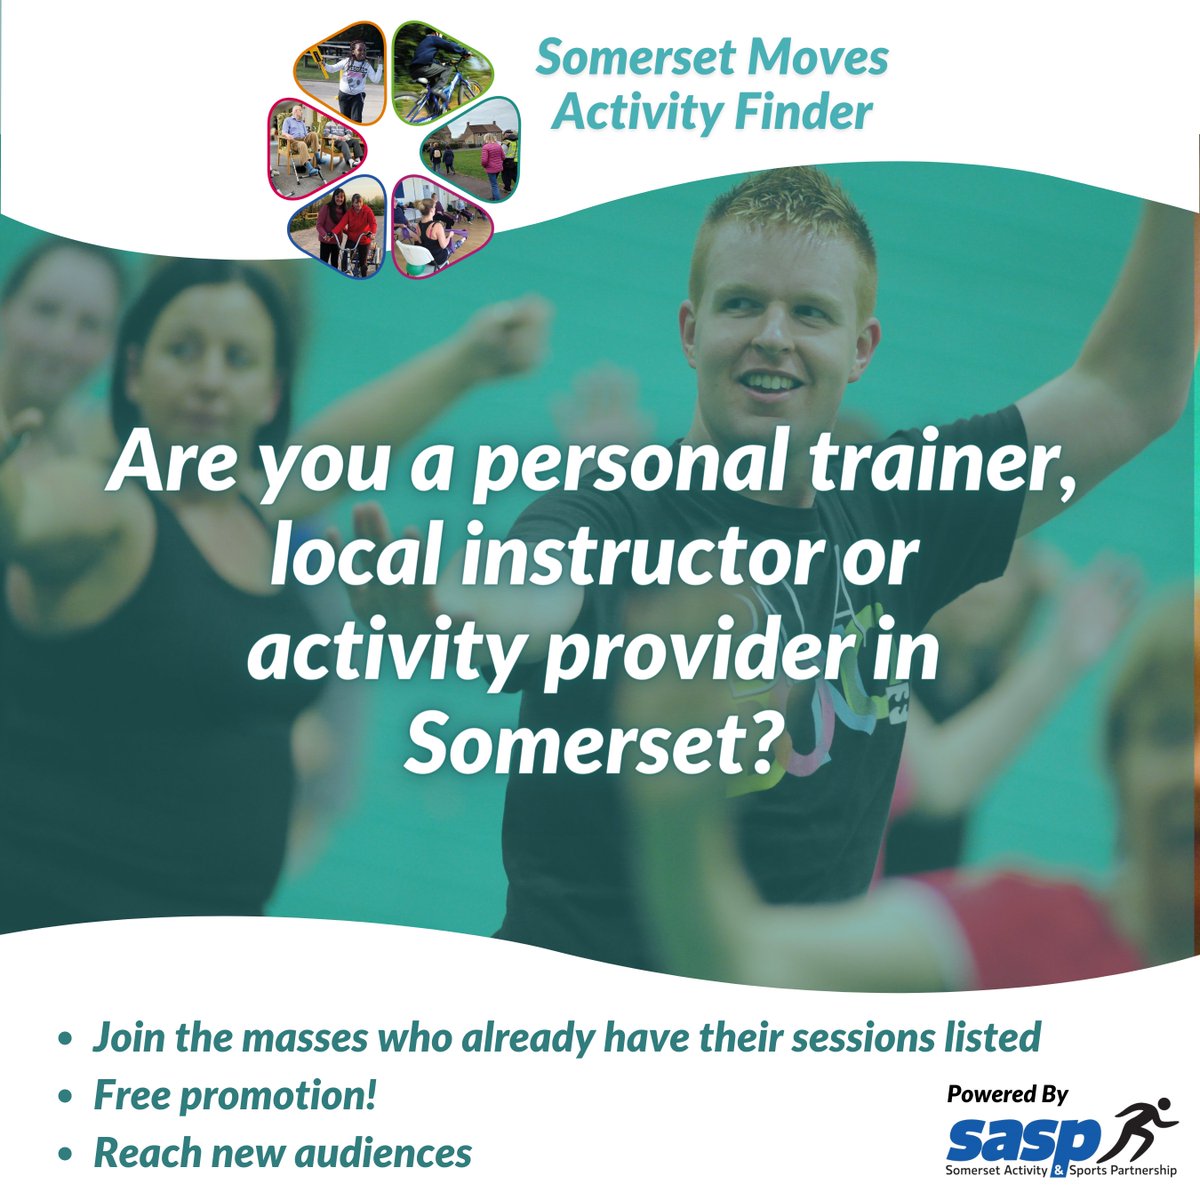 Calling all personal trainers, local instructor & activity providers in #Somerset 📢 By adding your sessions to our #SomersetMoves Activity Finder, you can reach new audiences & encourage new groups to try your activity! Find more info at sasp.co.uk/activity-provi…. #BeActive